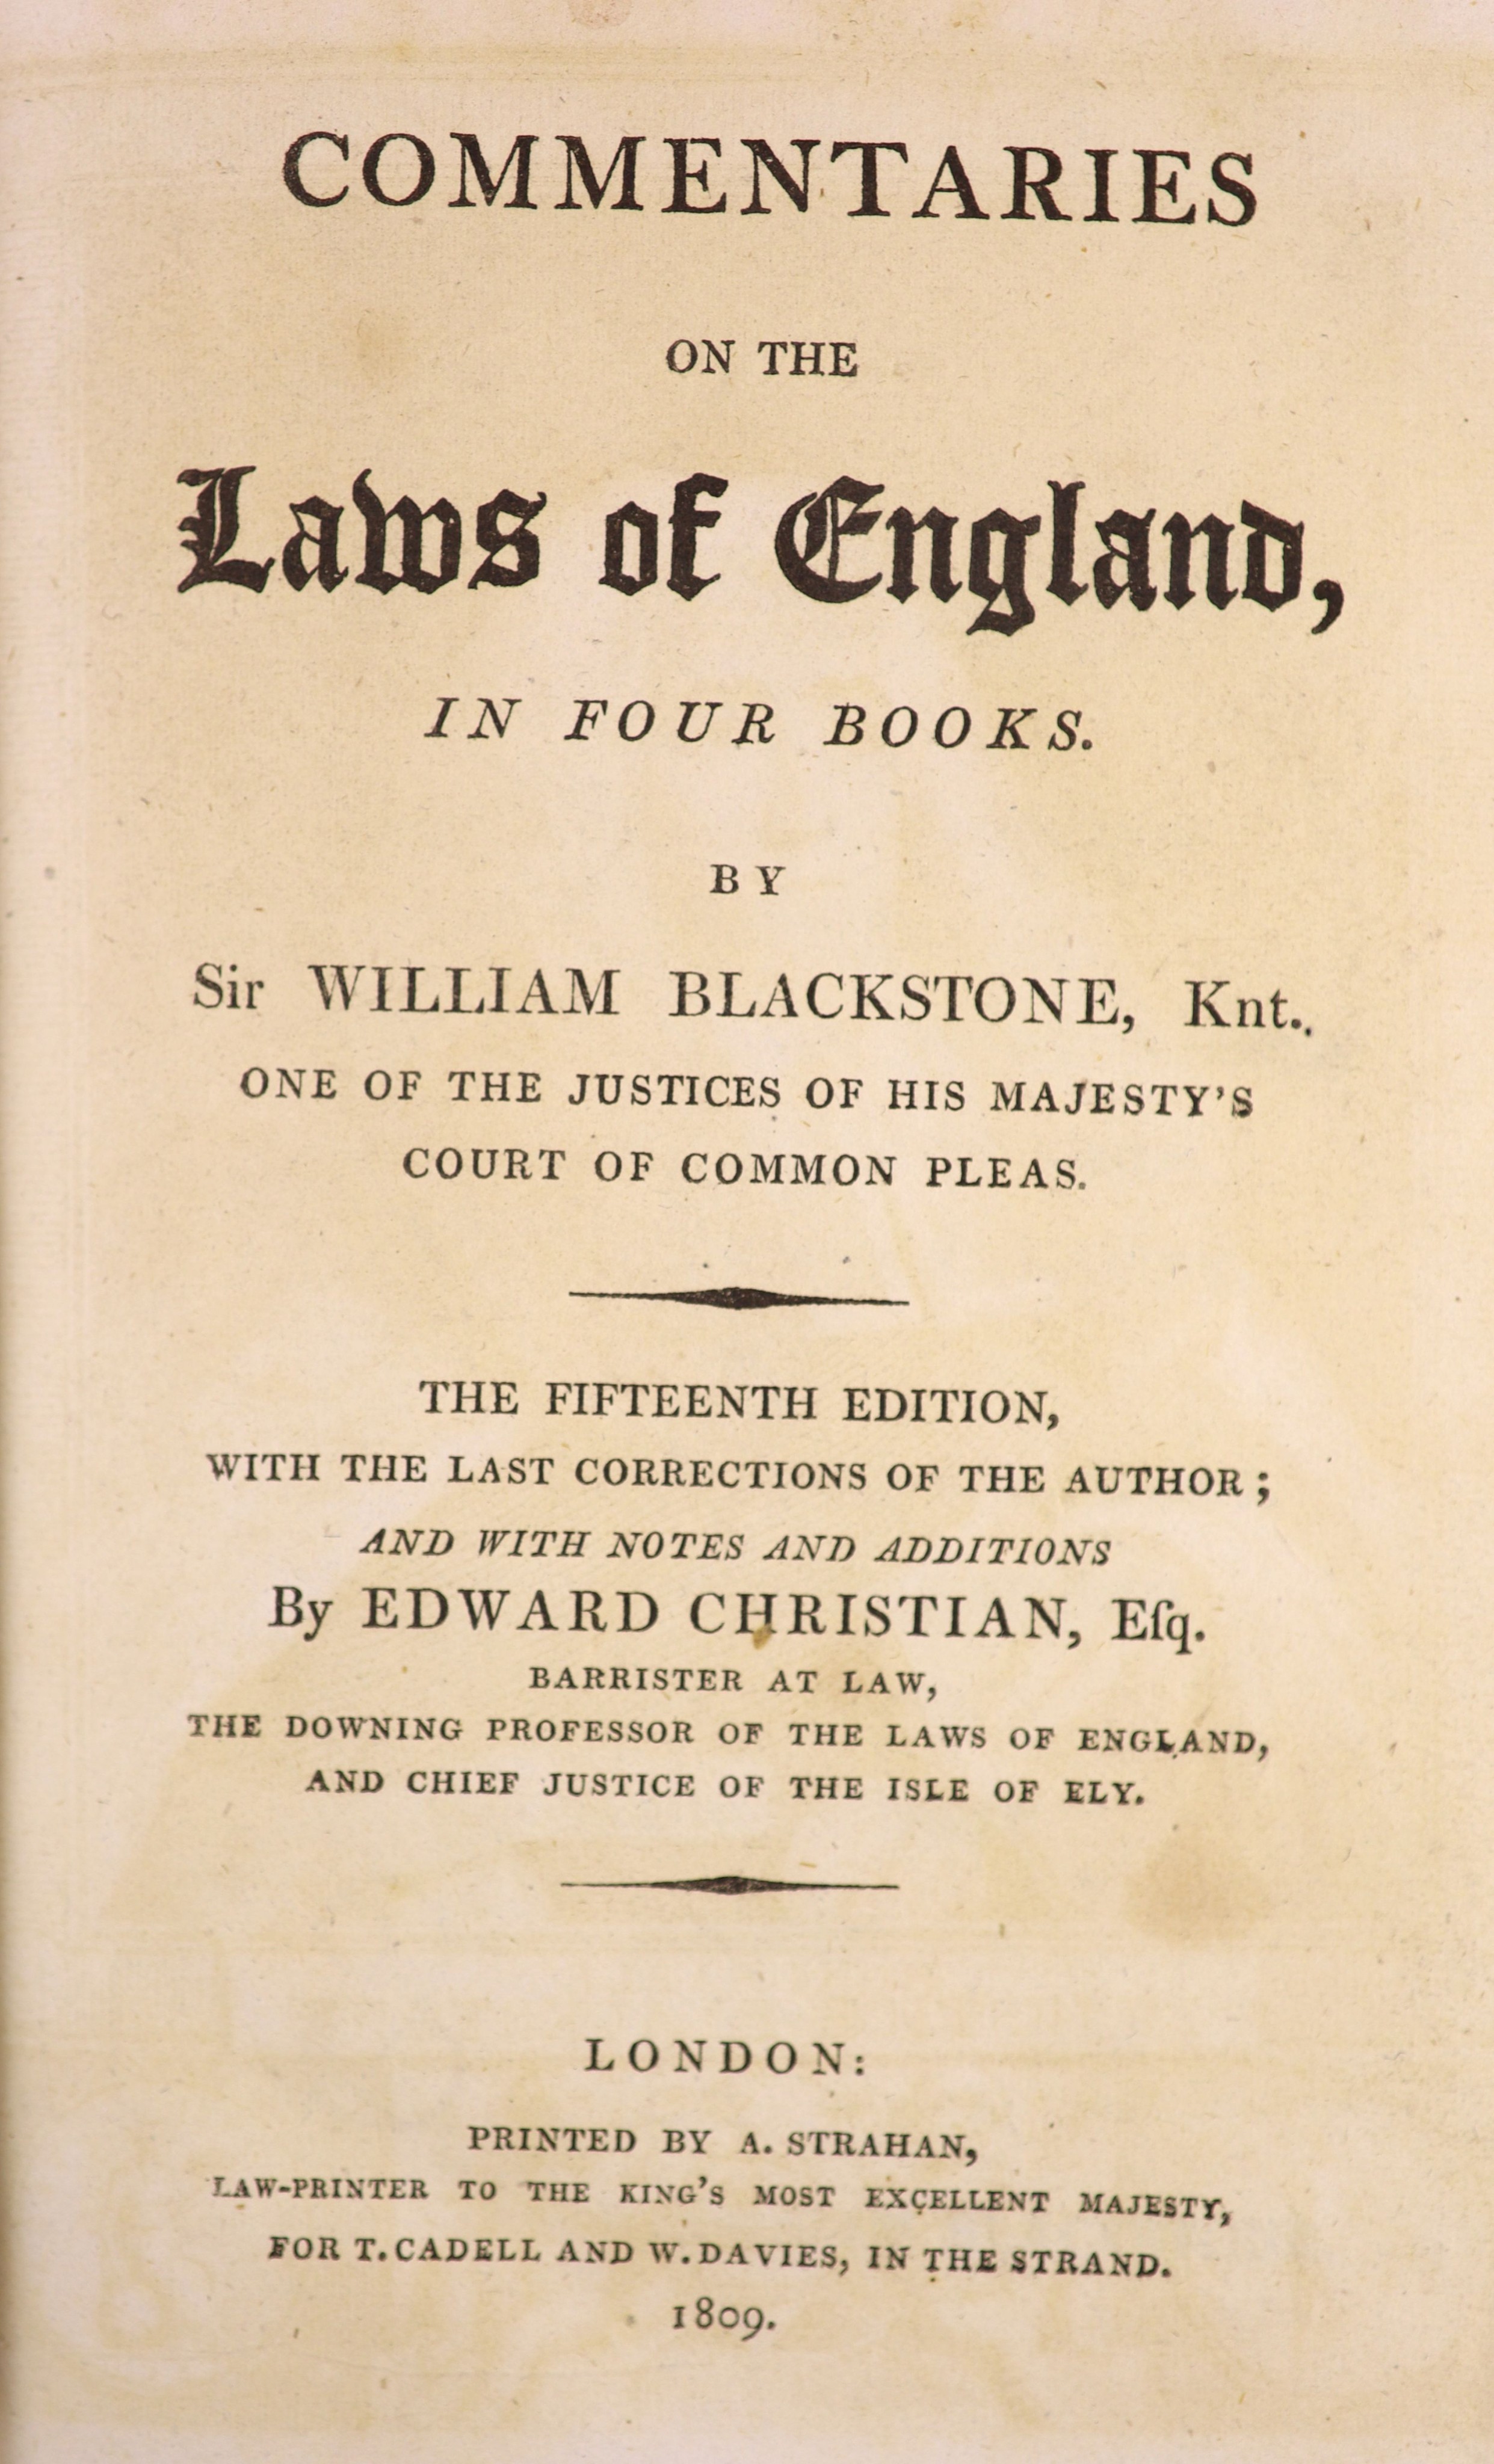 Blackstone, William - Commentaries on the Laws of England…With the last corrections of the author; and with notes and additions by Edward Christian…4 vols.15th edition. Complete with 2 plates, 1 of which is folding. Deco